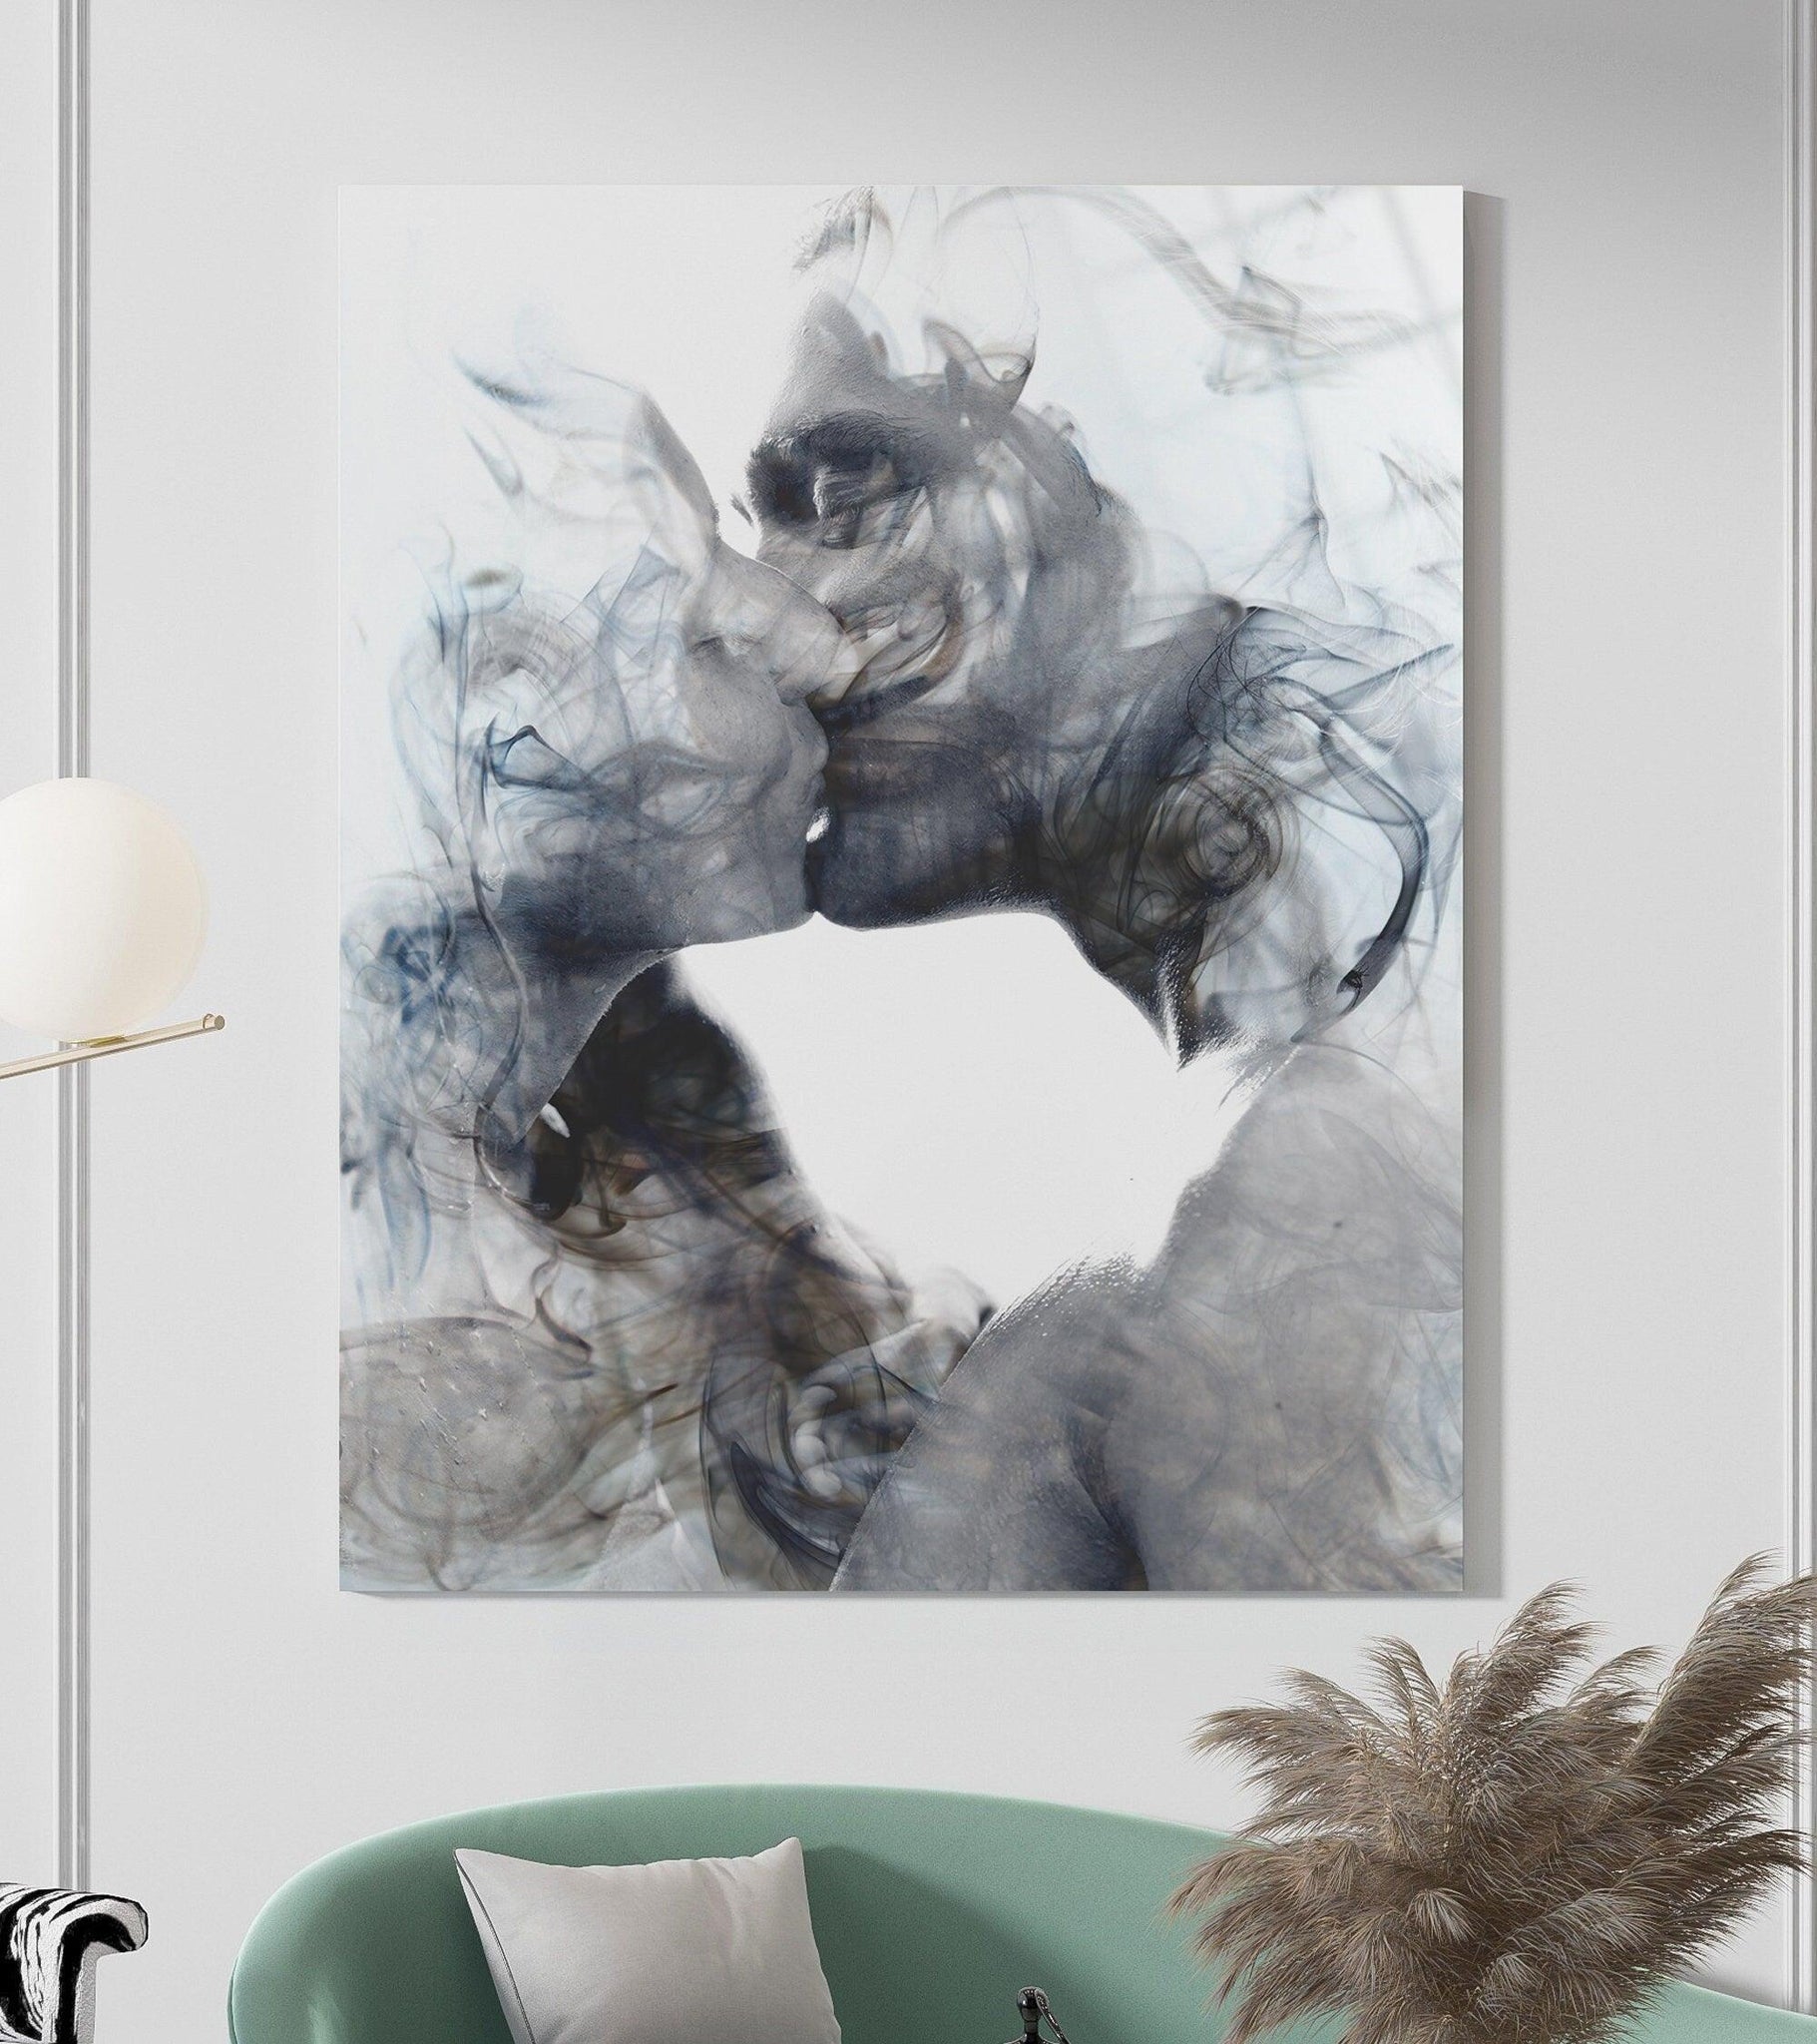 Abstract Couple Kissing canvas wall|  Romantic Kissing wall art, Smoke Effect, Love Portrait, love making Canvas Print, Home Decore